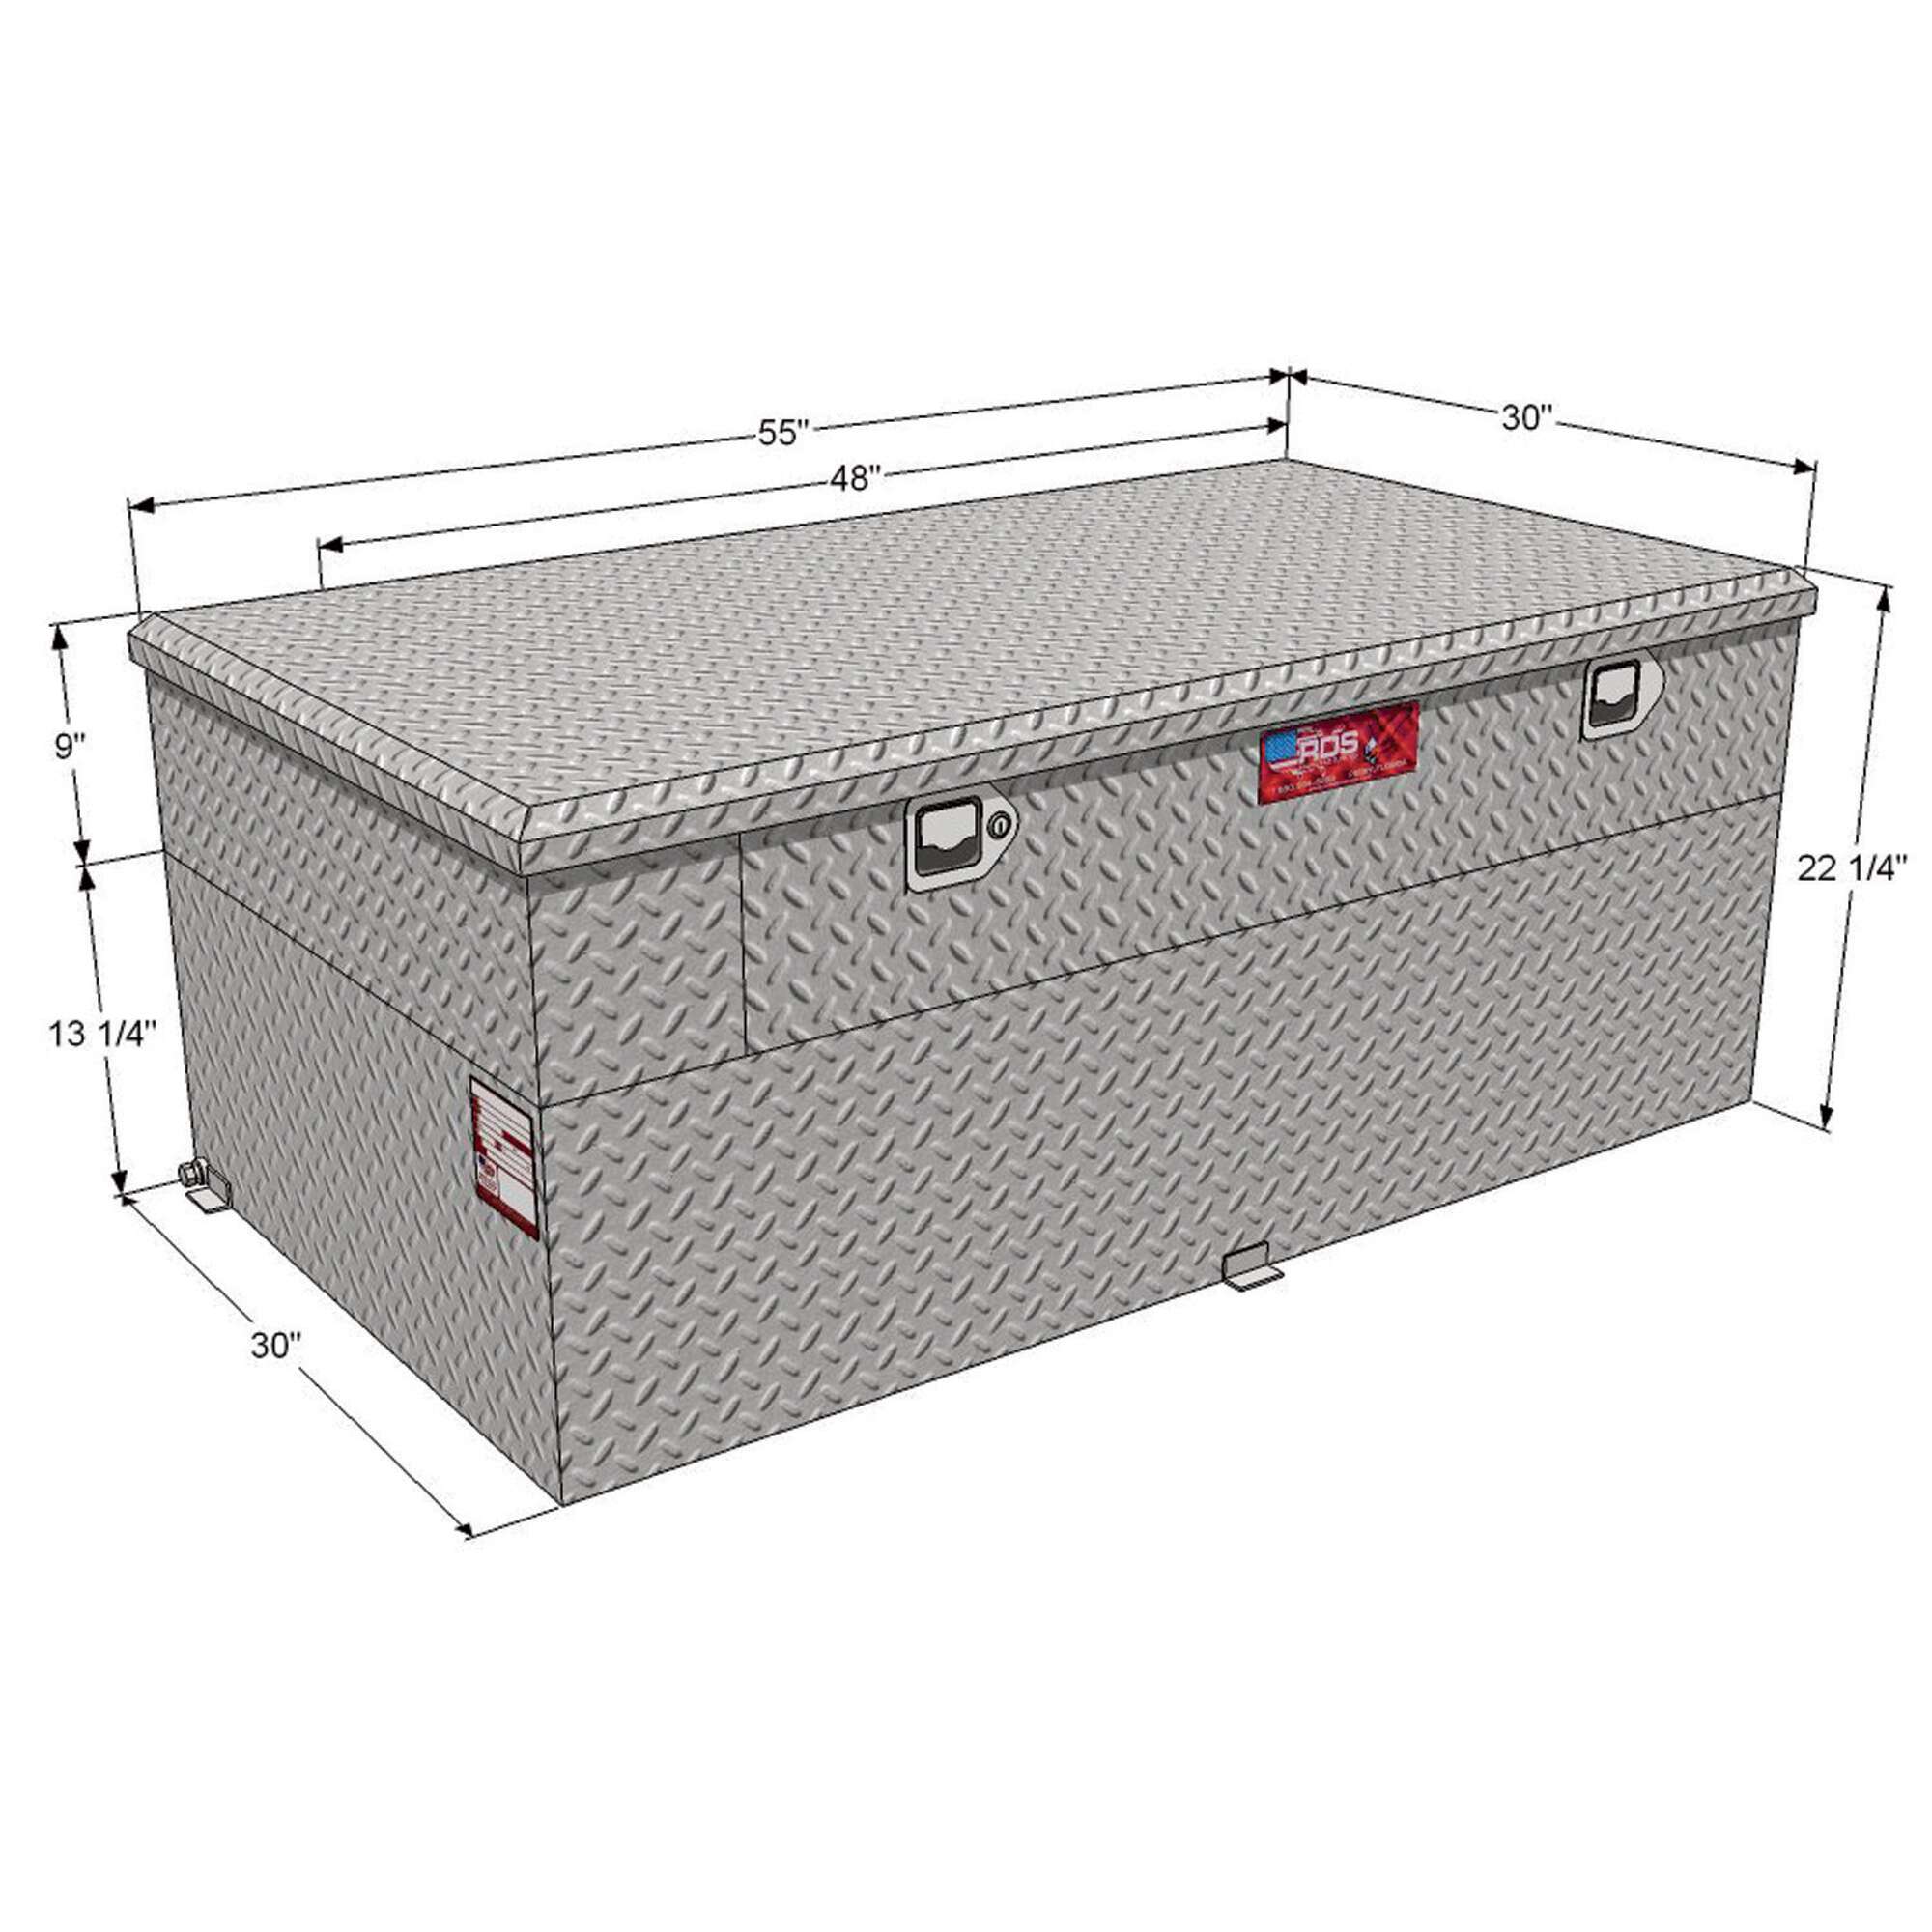 Auxiliary Toolbox & Fuel Tanks Combos